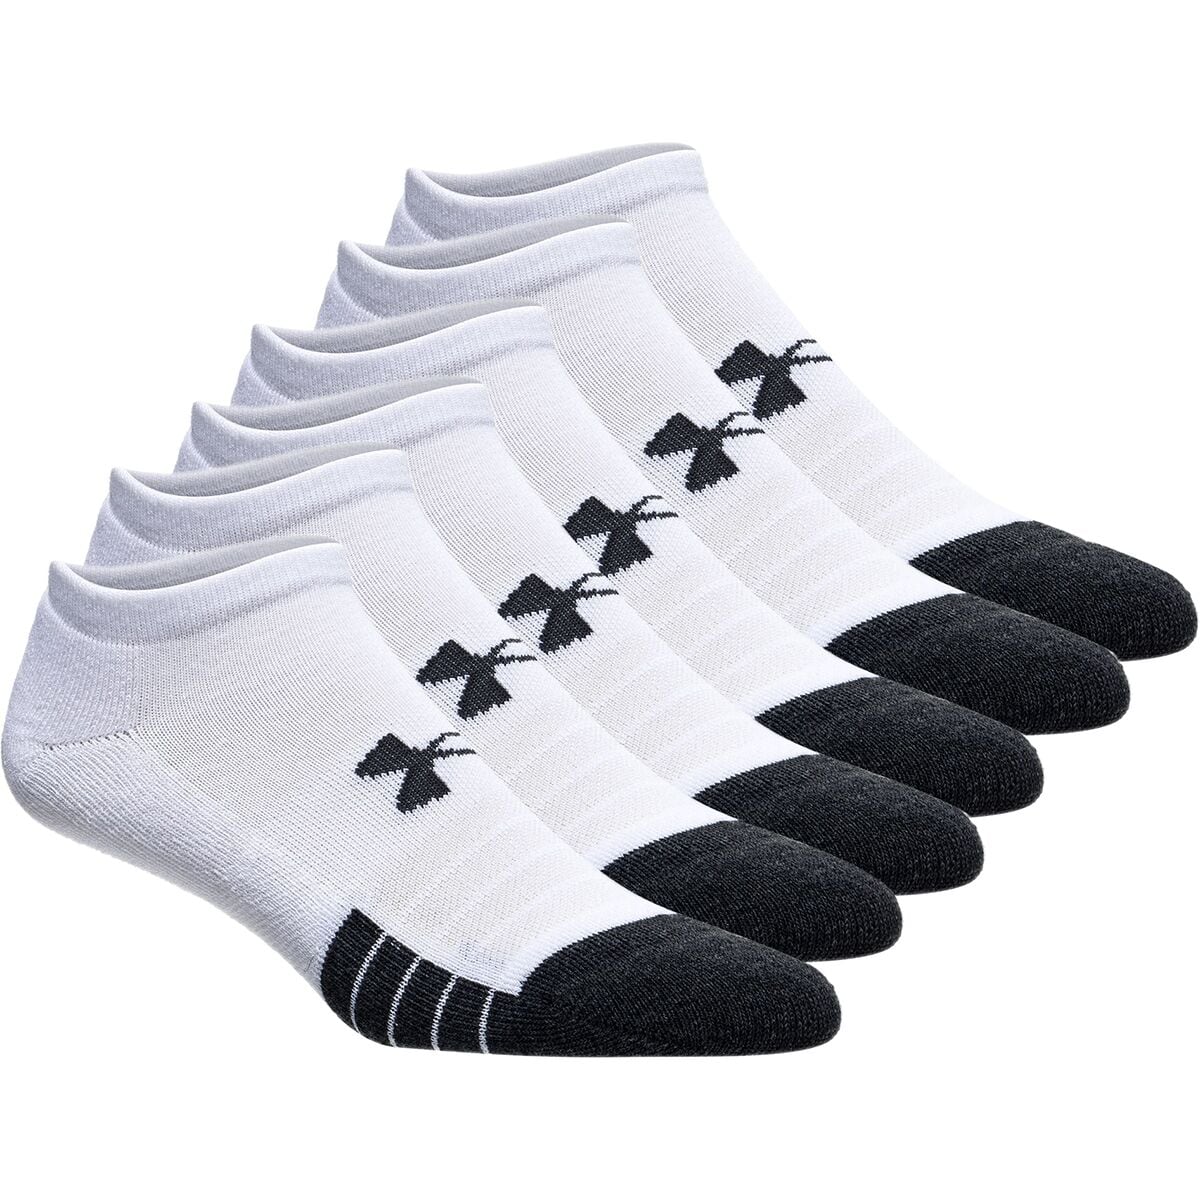 Under Armour Performance Tech No-Show Sock - 6-Pack